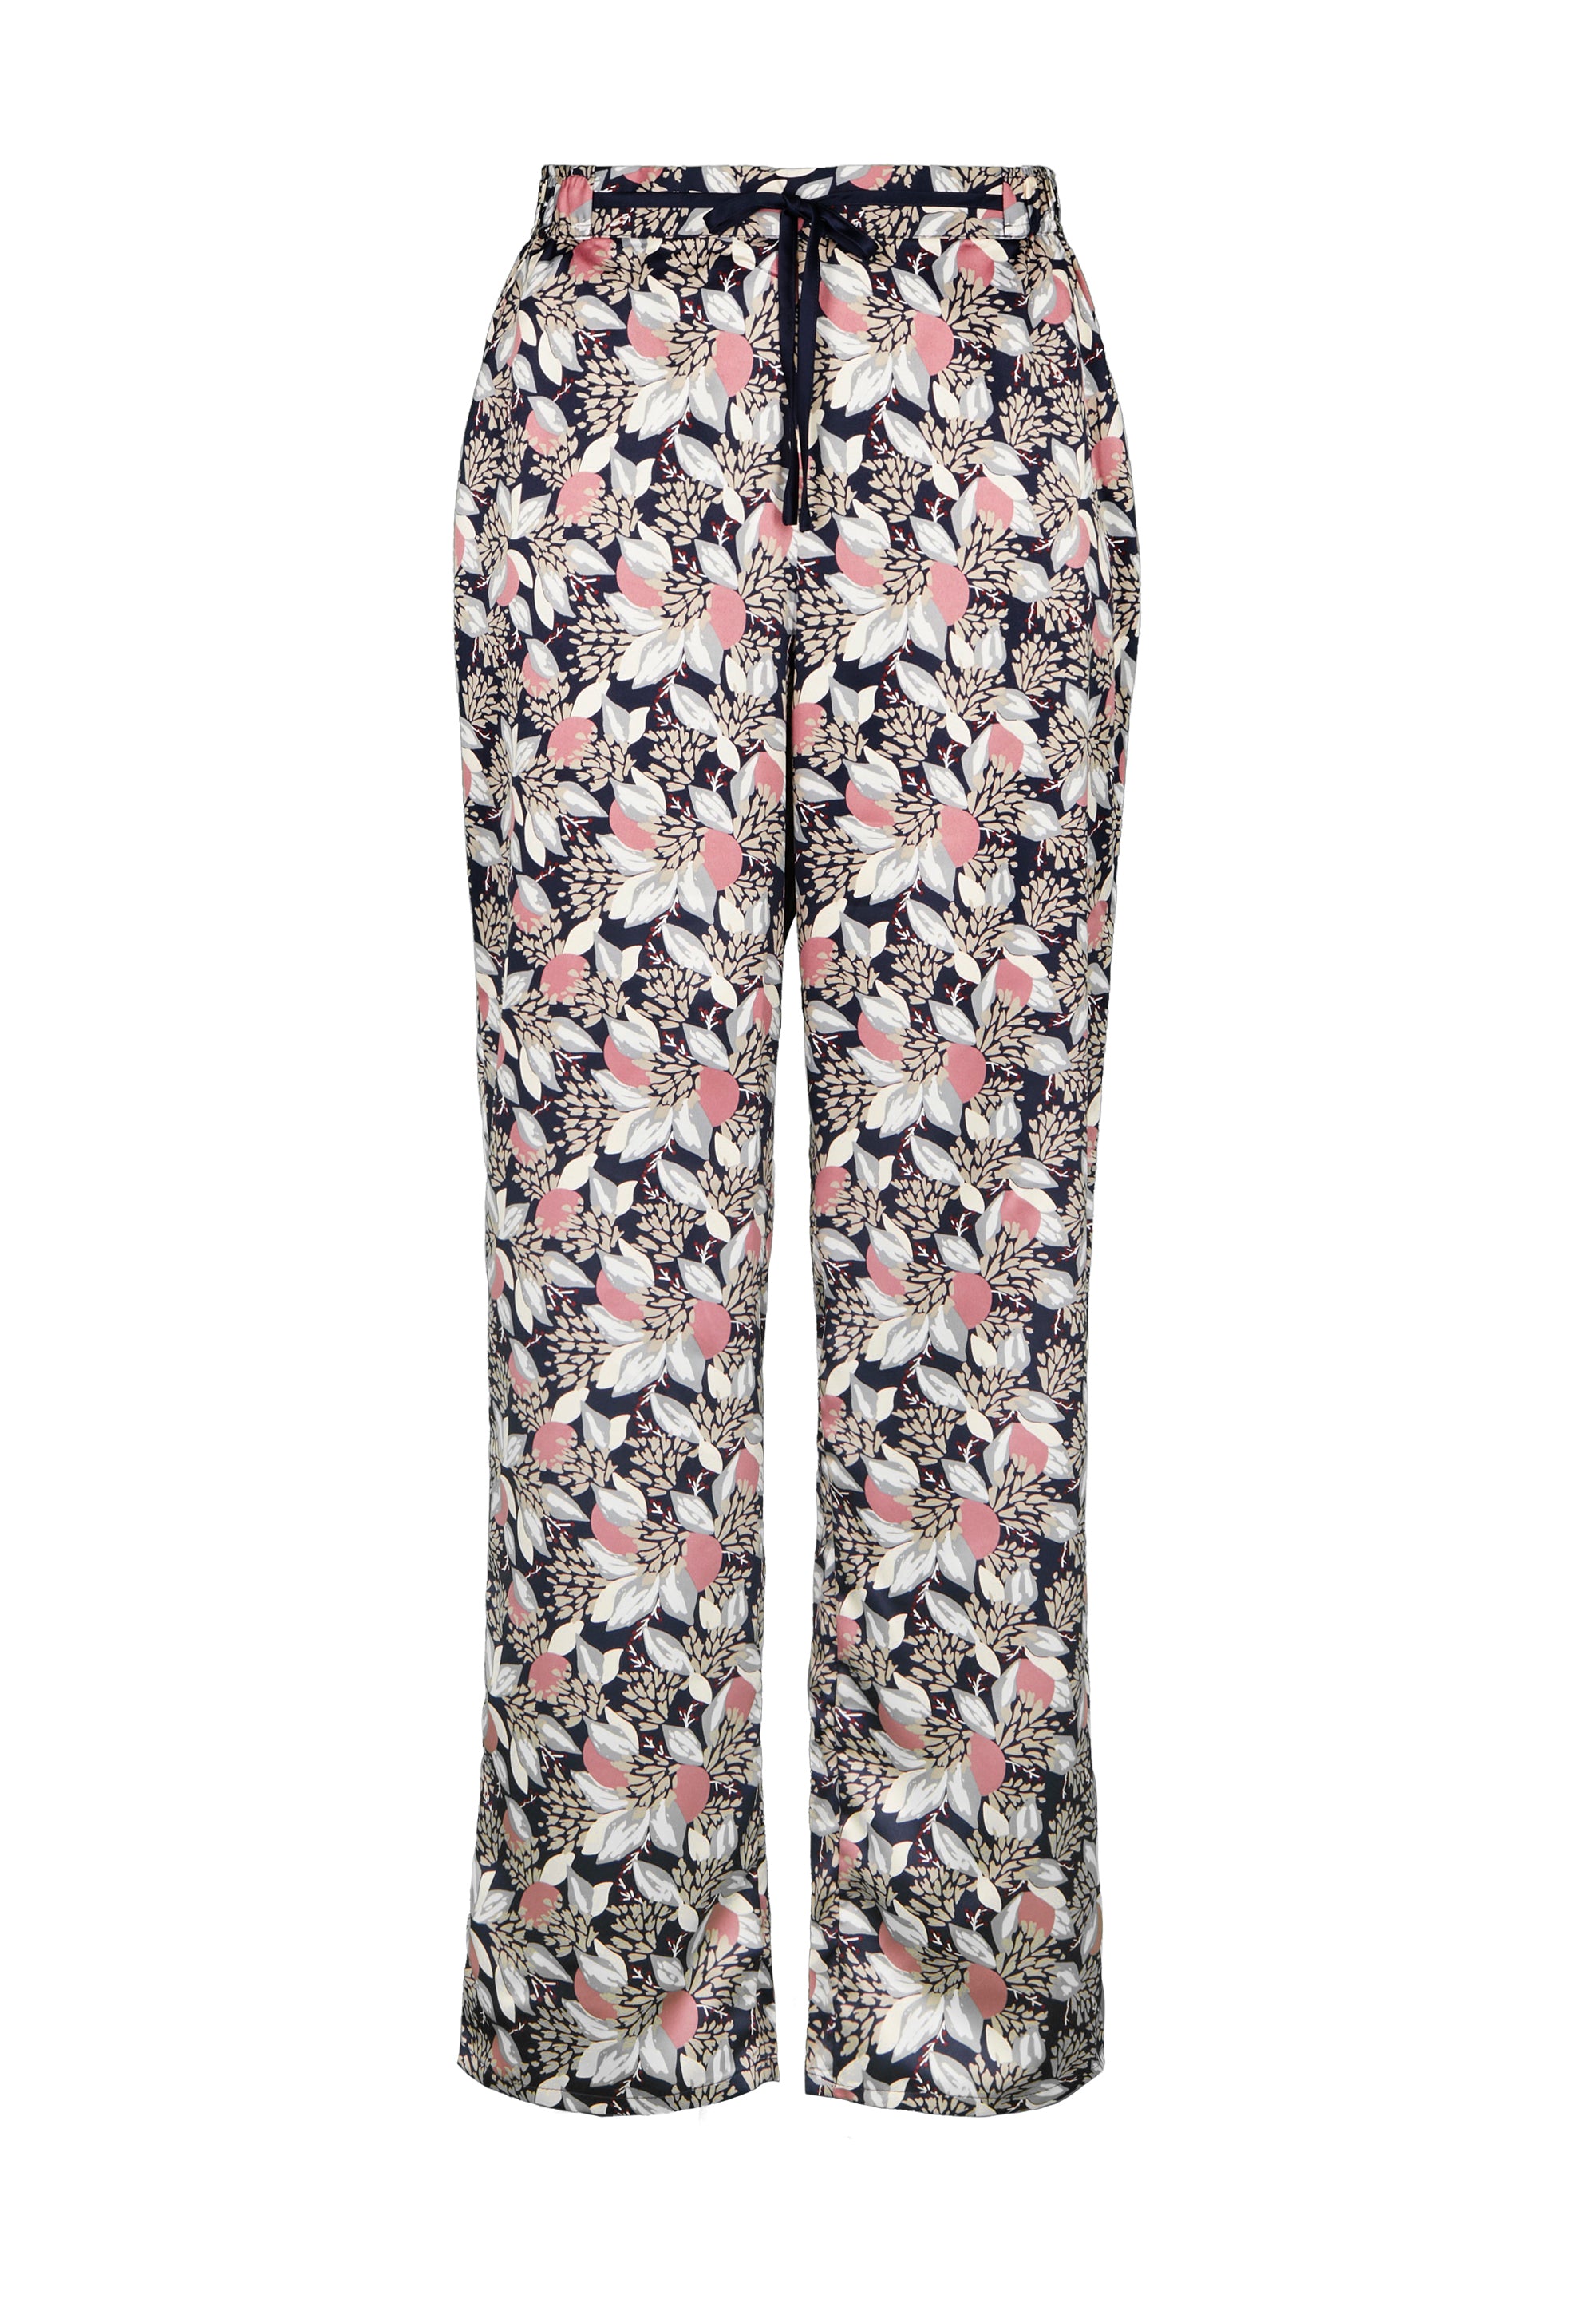 Trousers Idole Blue Pink Floral Print